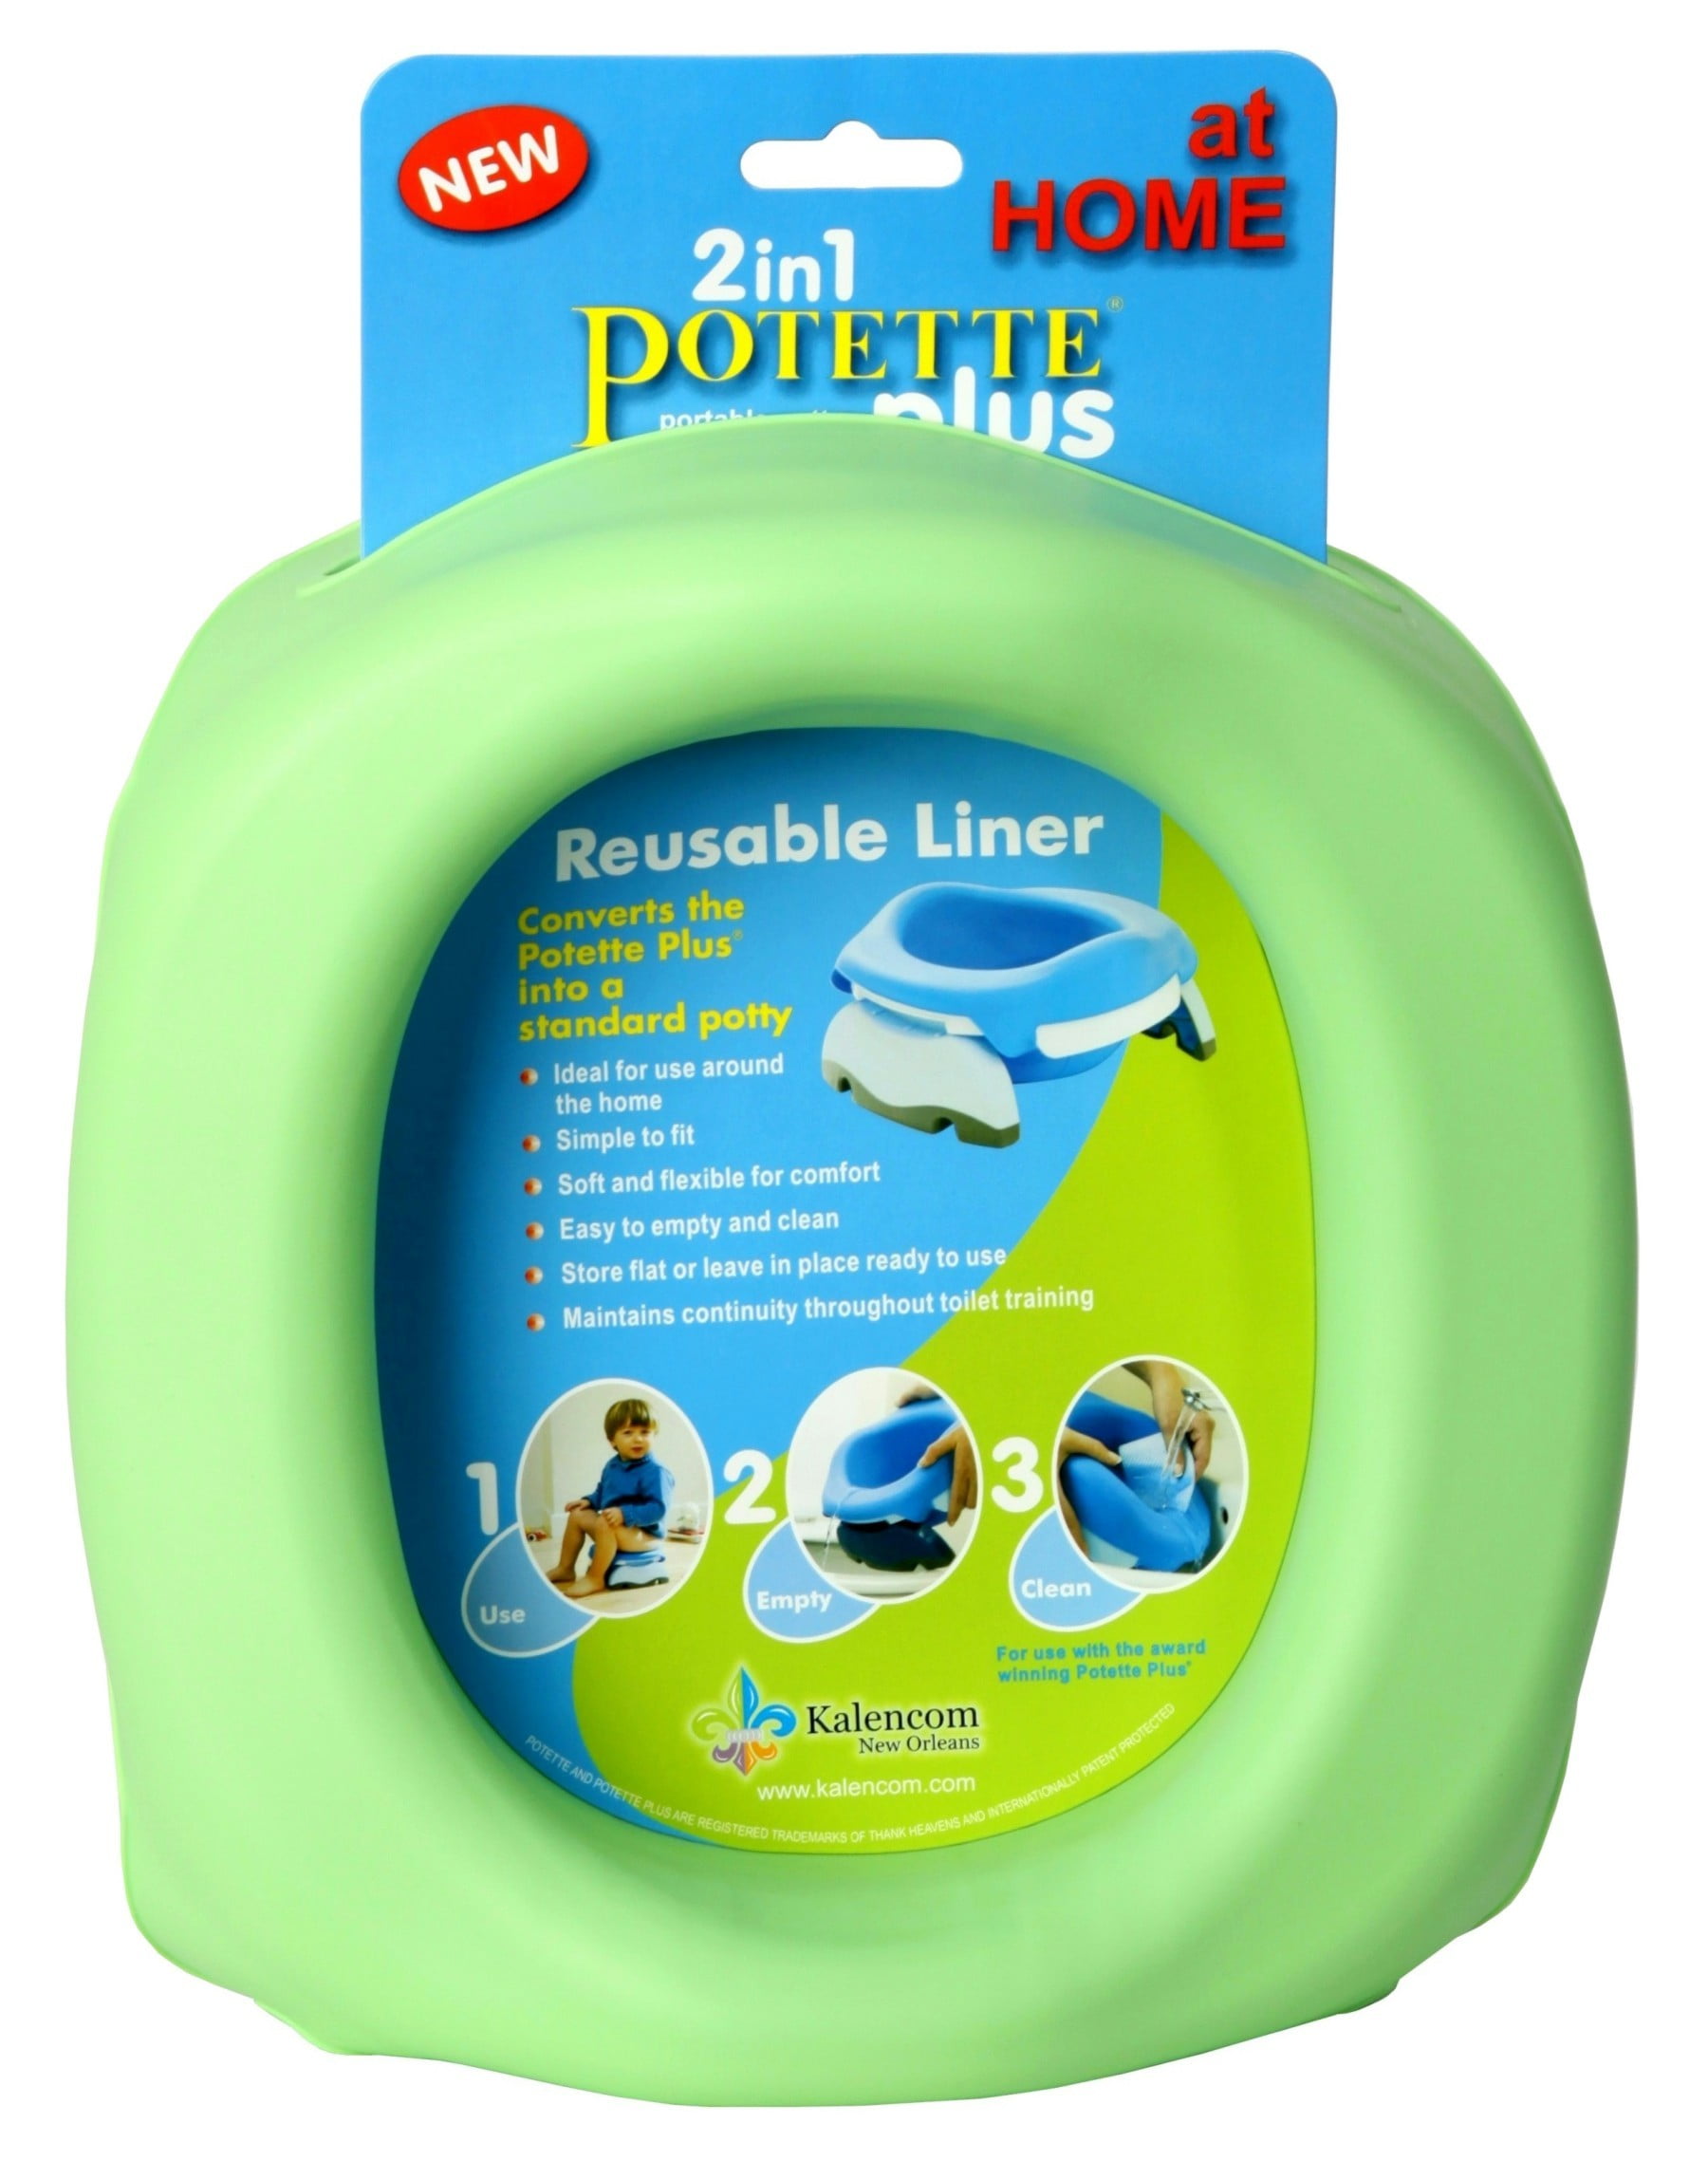 GREY Fold Flat Easy to Clean Reusable Liner to fit Potette Plus Travel Potty 